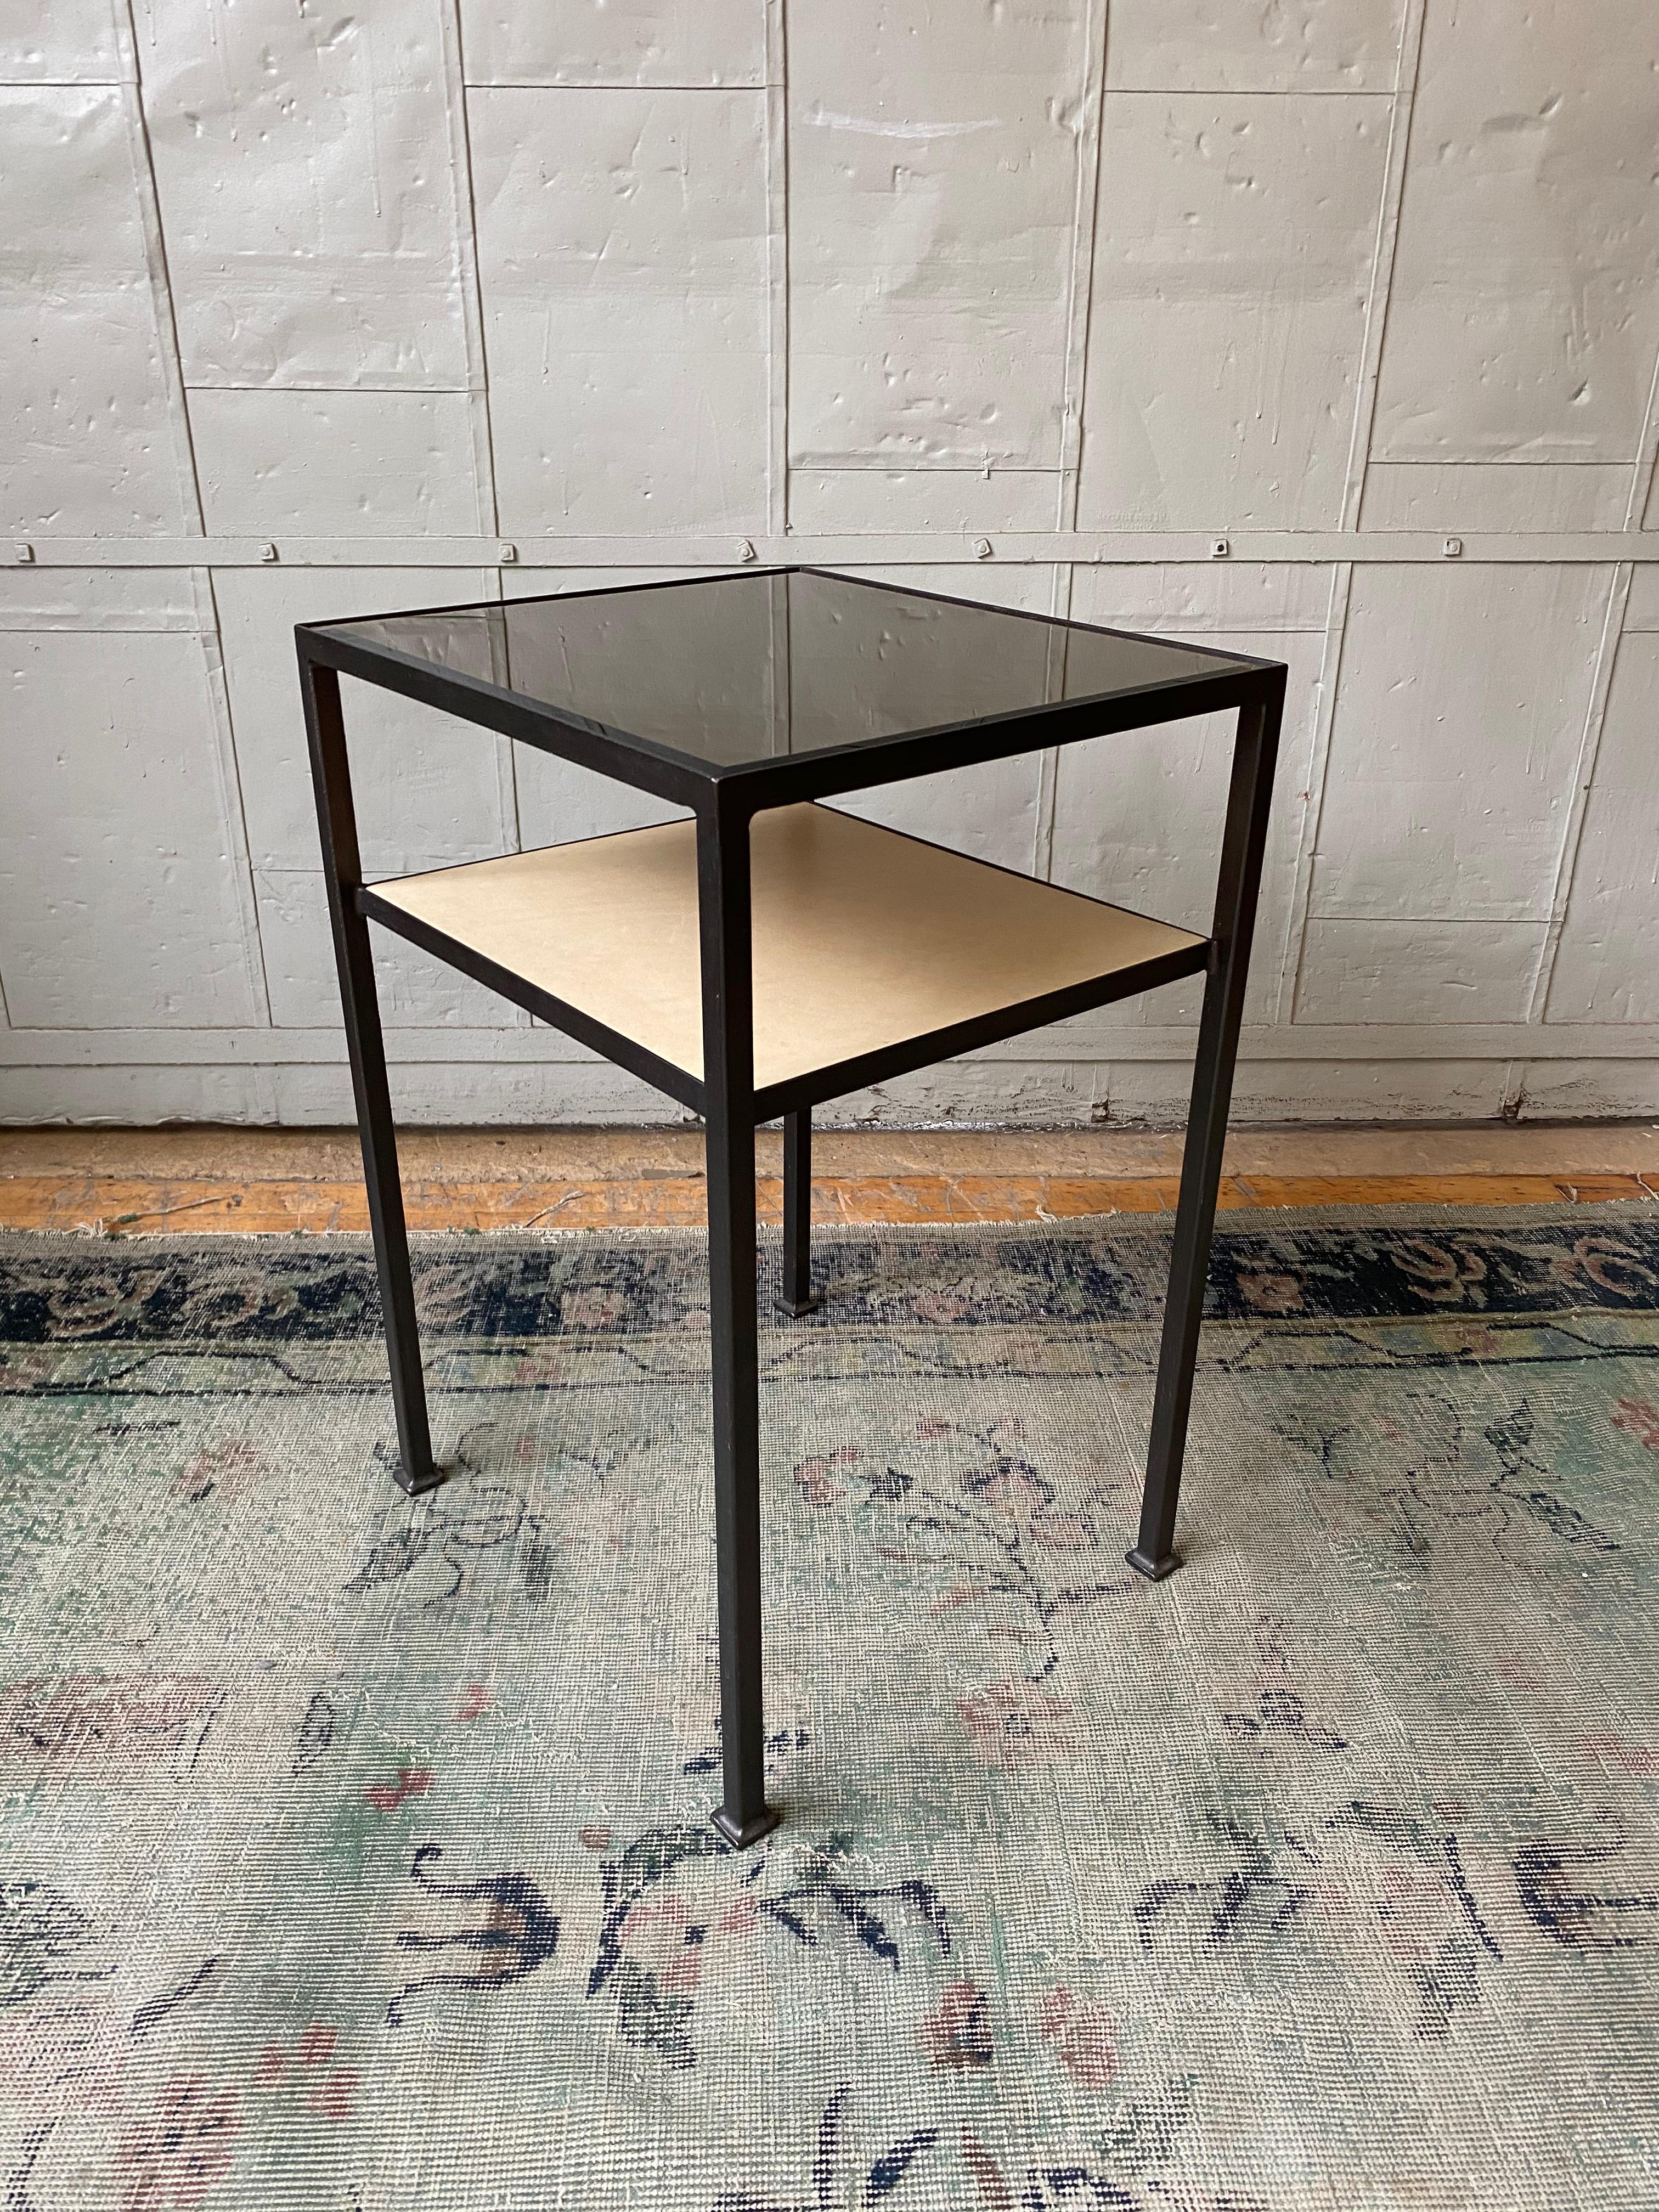 This well proportioned night stand or side table features an iron frame in a hand applied bronze finish with clear glass top and leather wrapped lower shelf. This is a floor sample from our discontinued Reeditions line. The sample is in good